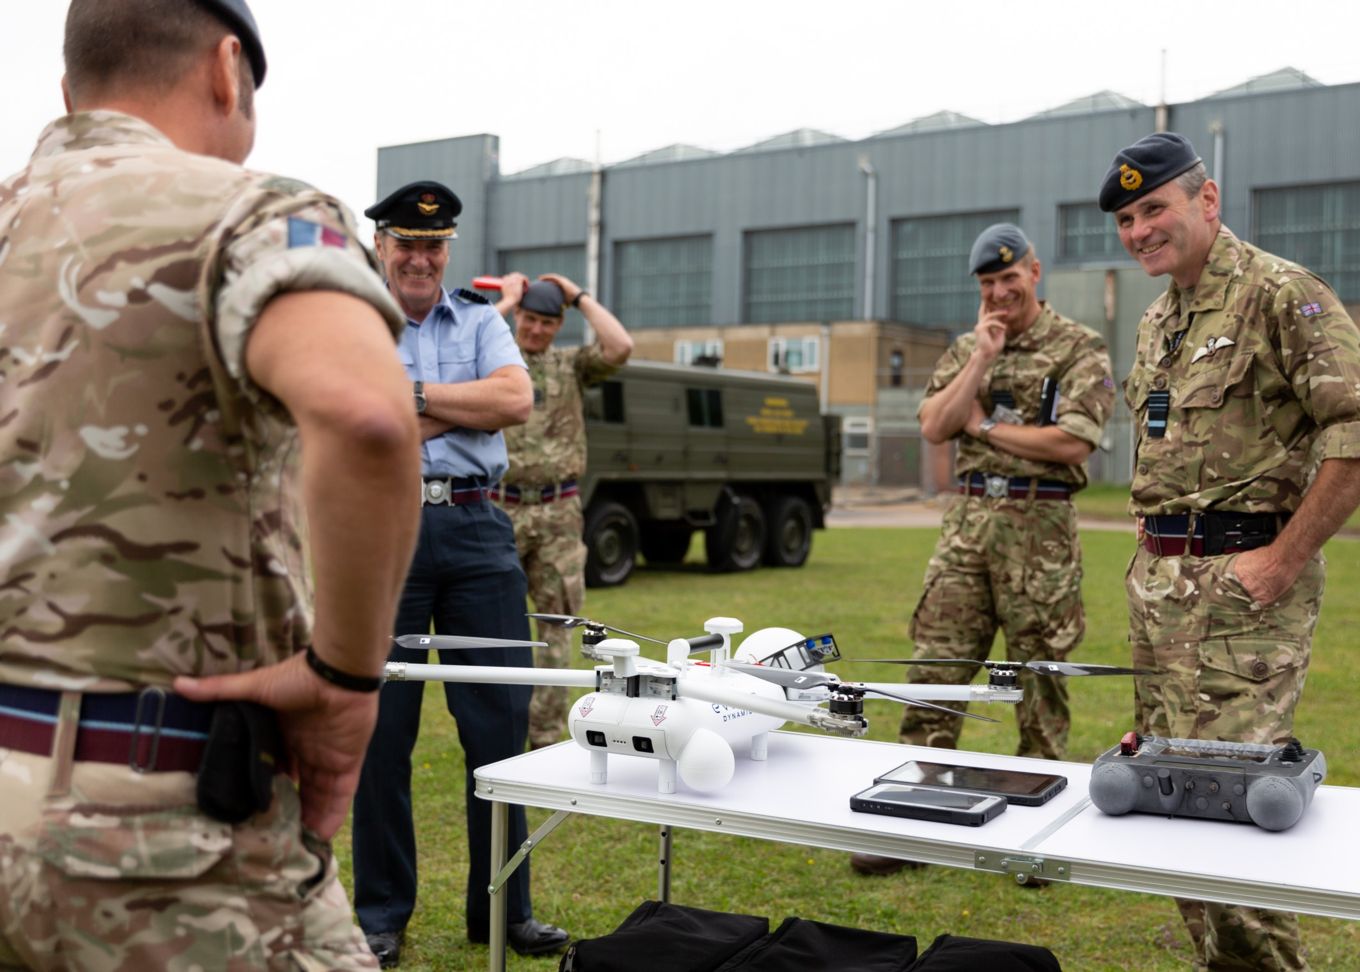 Force Protection Centre SME’s highlight the use of the Remote Piloted Air Systems (RPAS) 